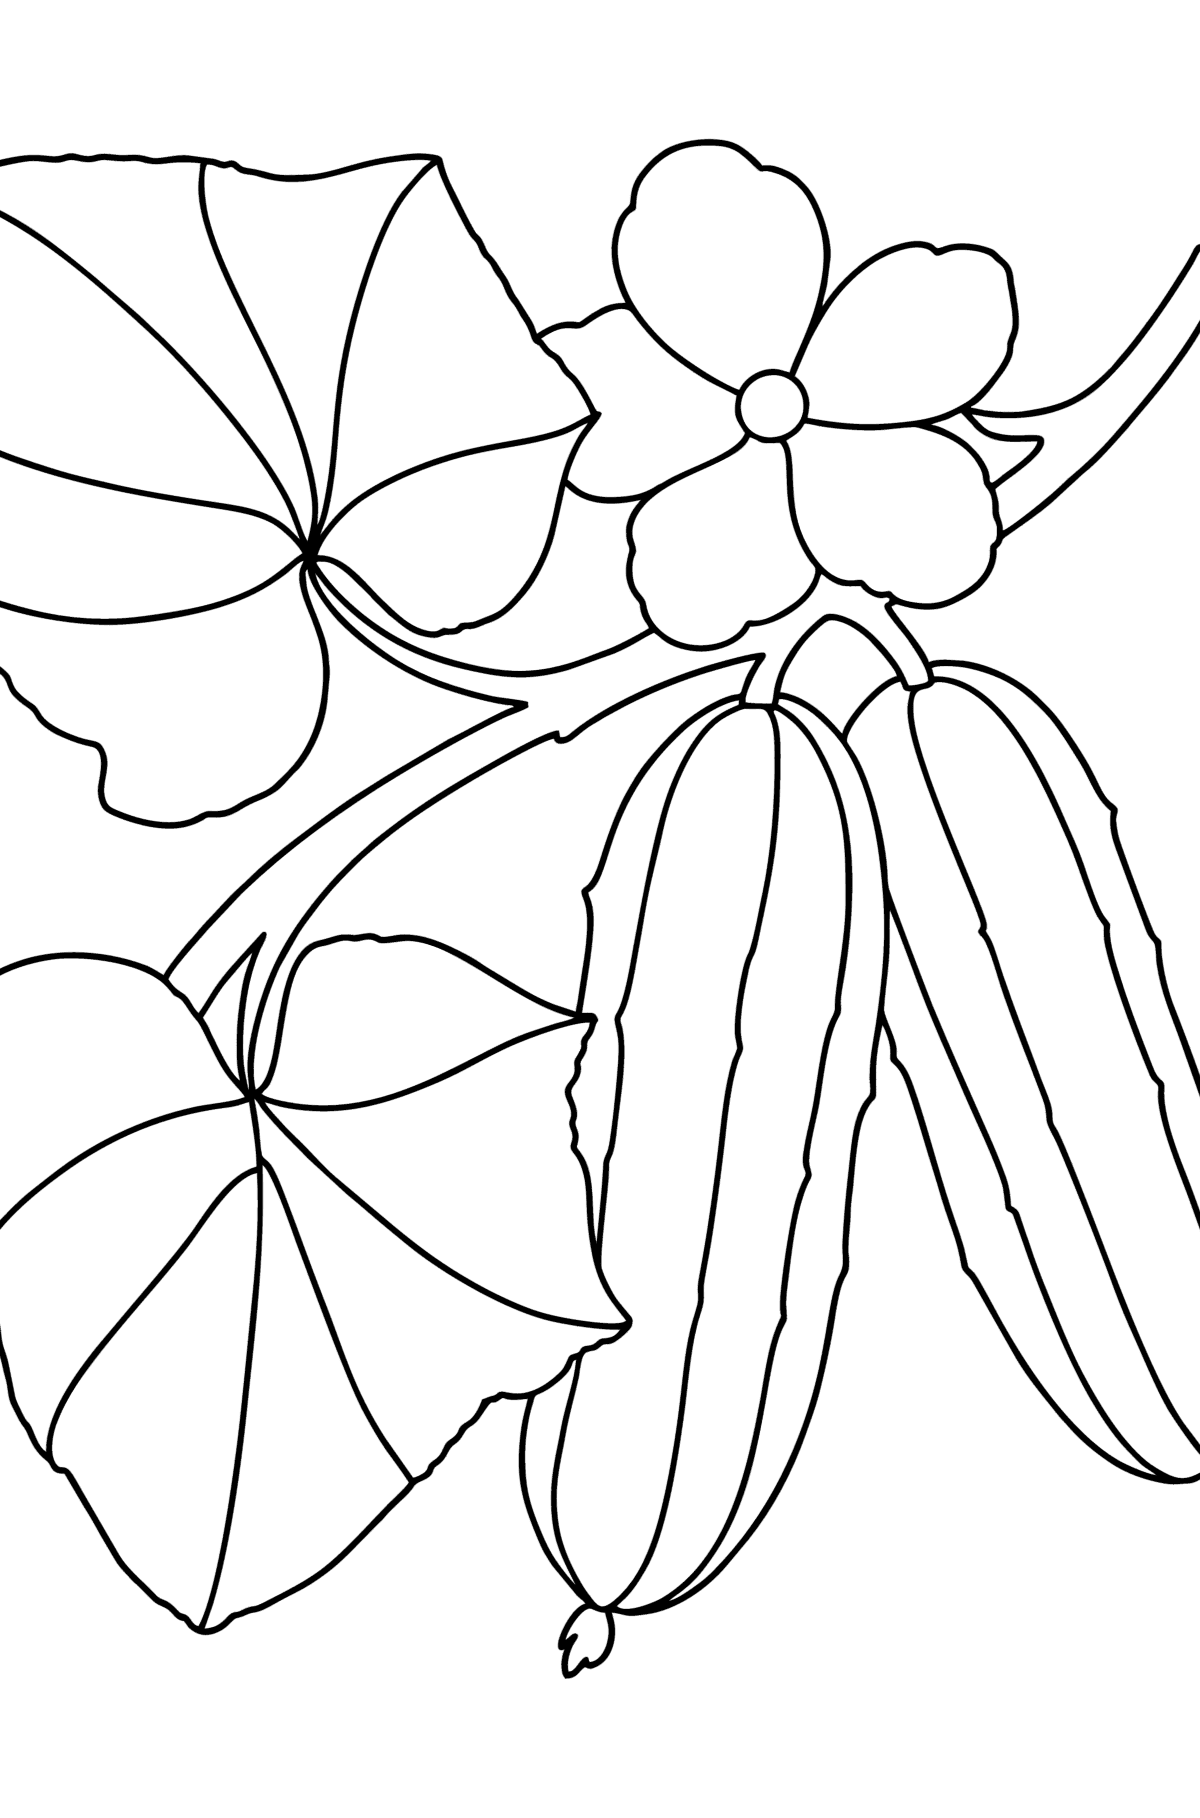 Cucumber grows сoloring page - Coloring Pages for Kids